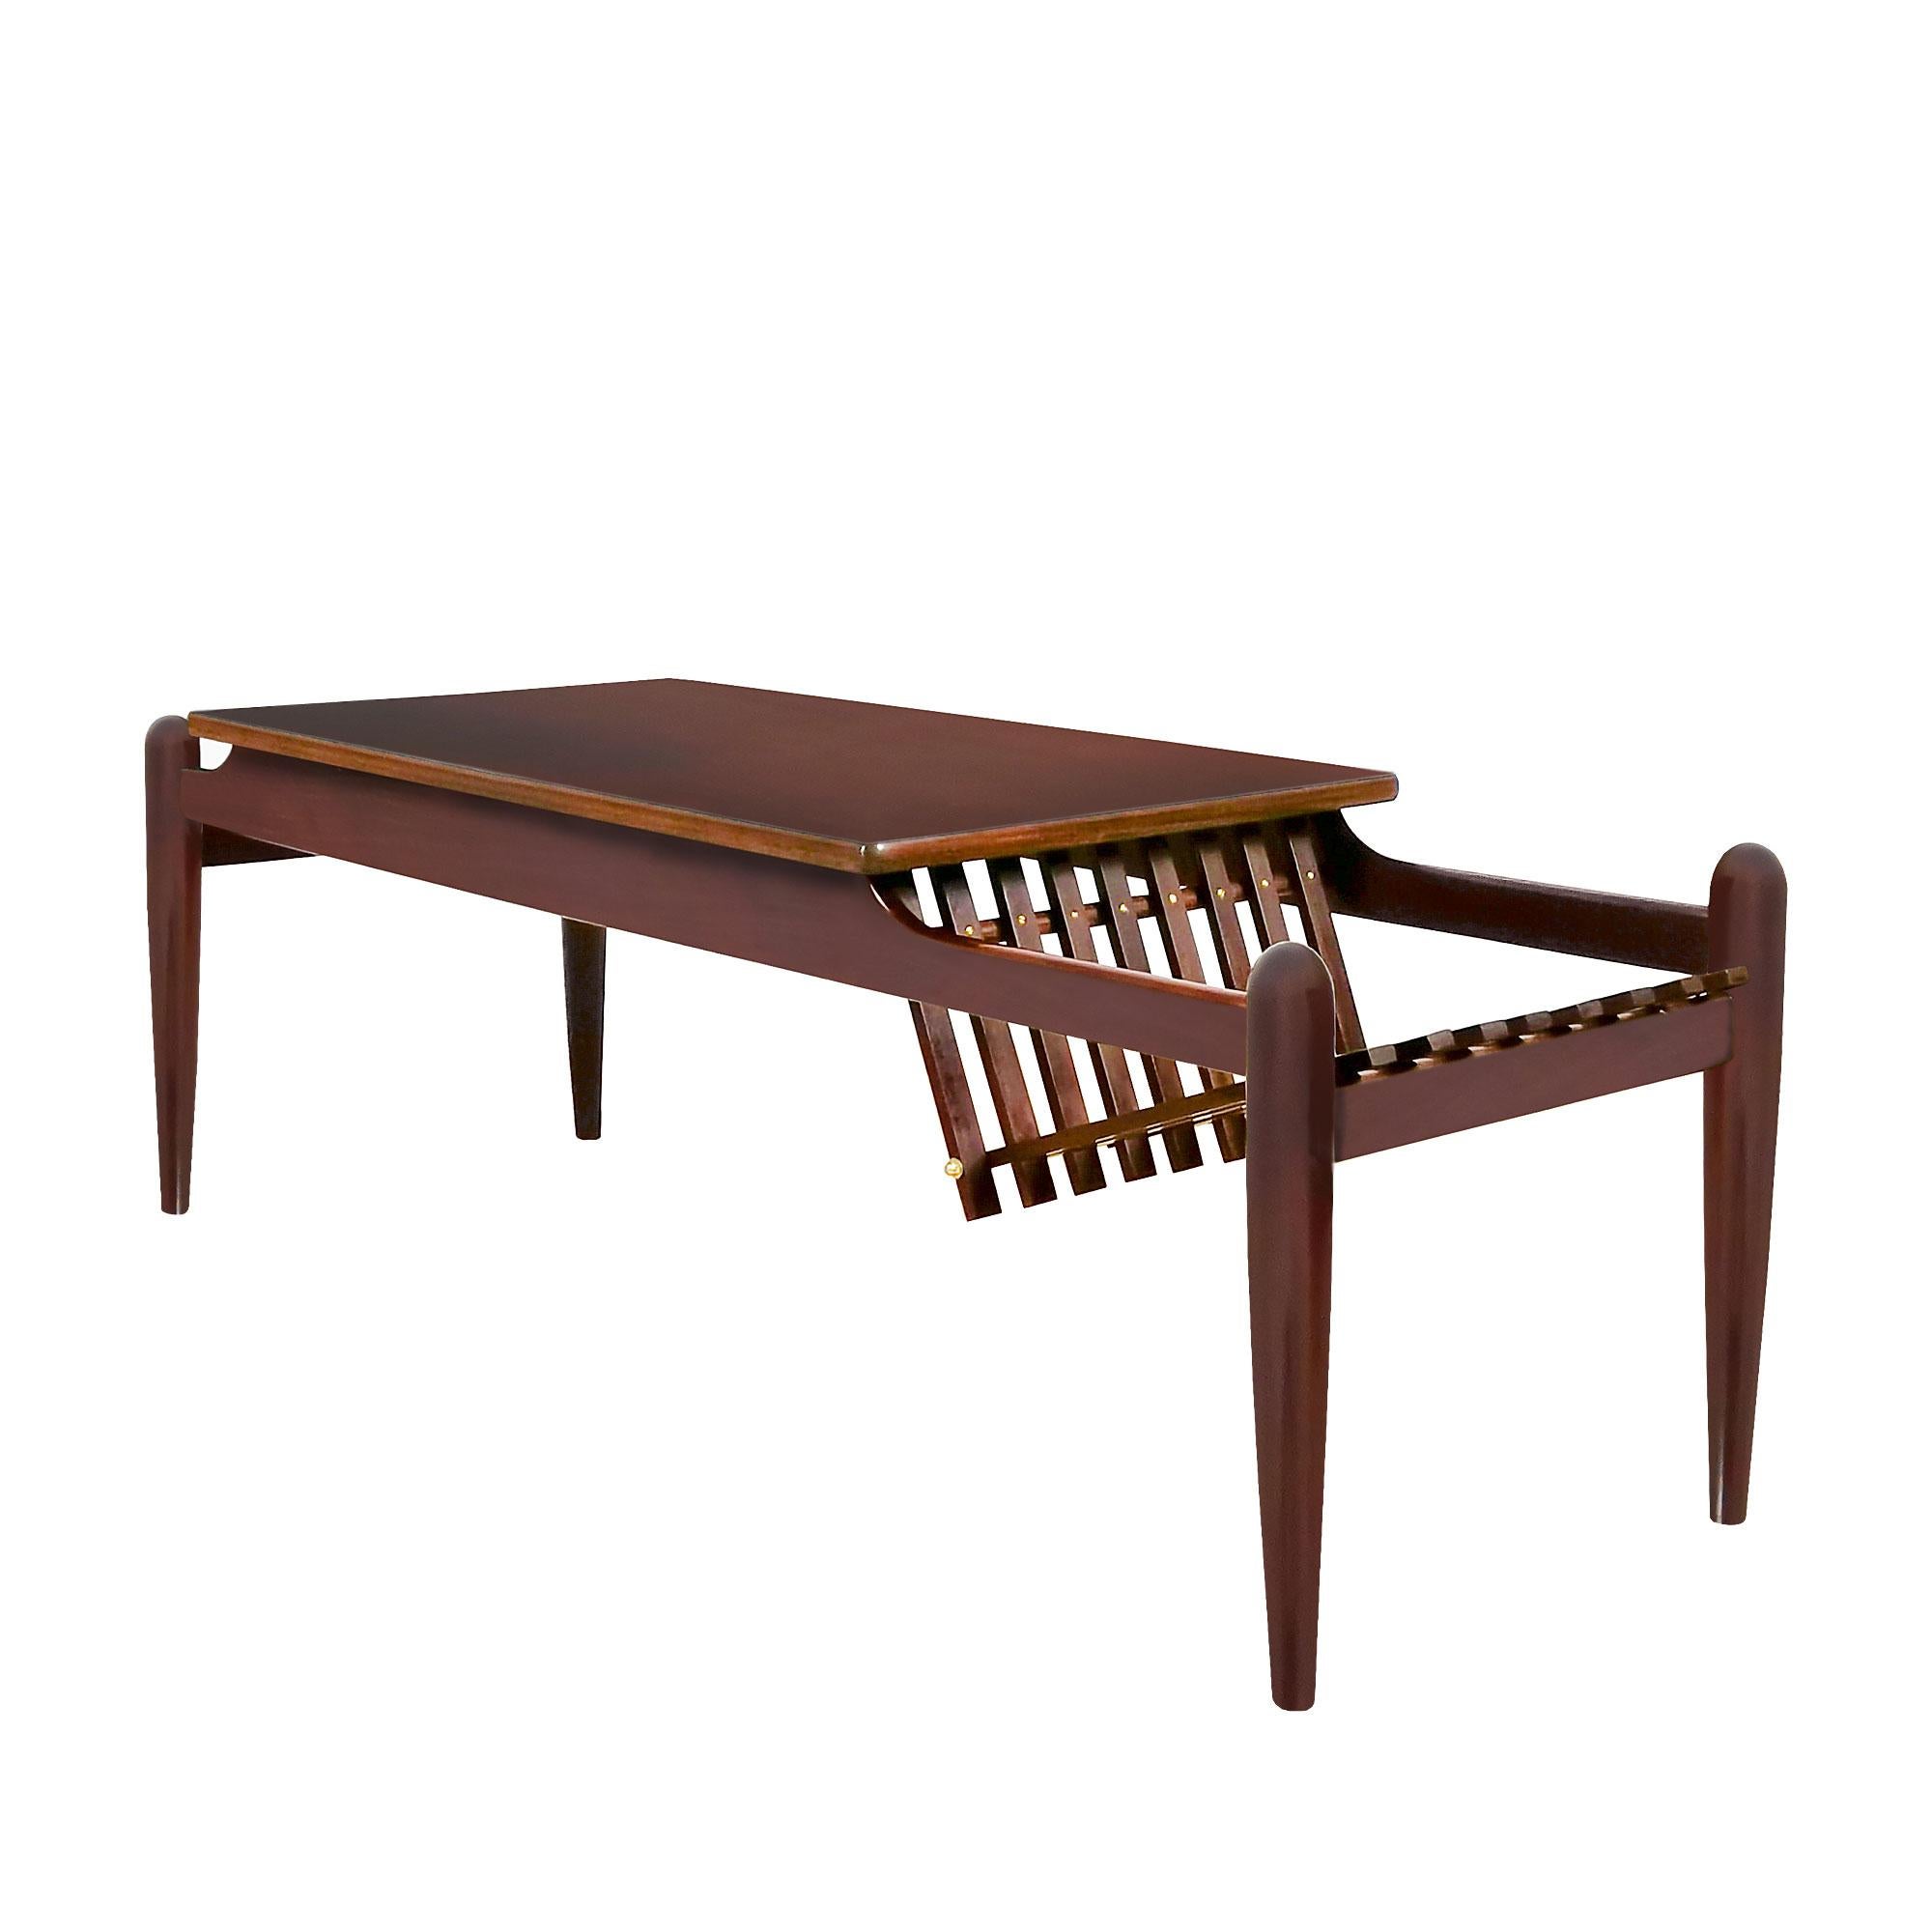 Mid-Century Modern Coffee Table with Magazine Rack, Mahogany and Brass - Italy For Sale 1